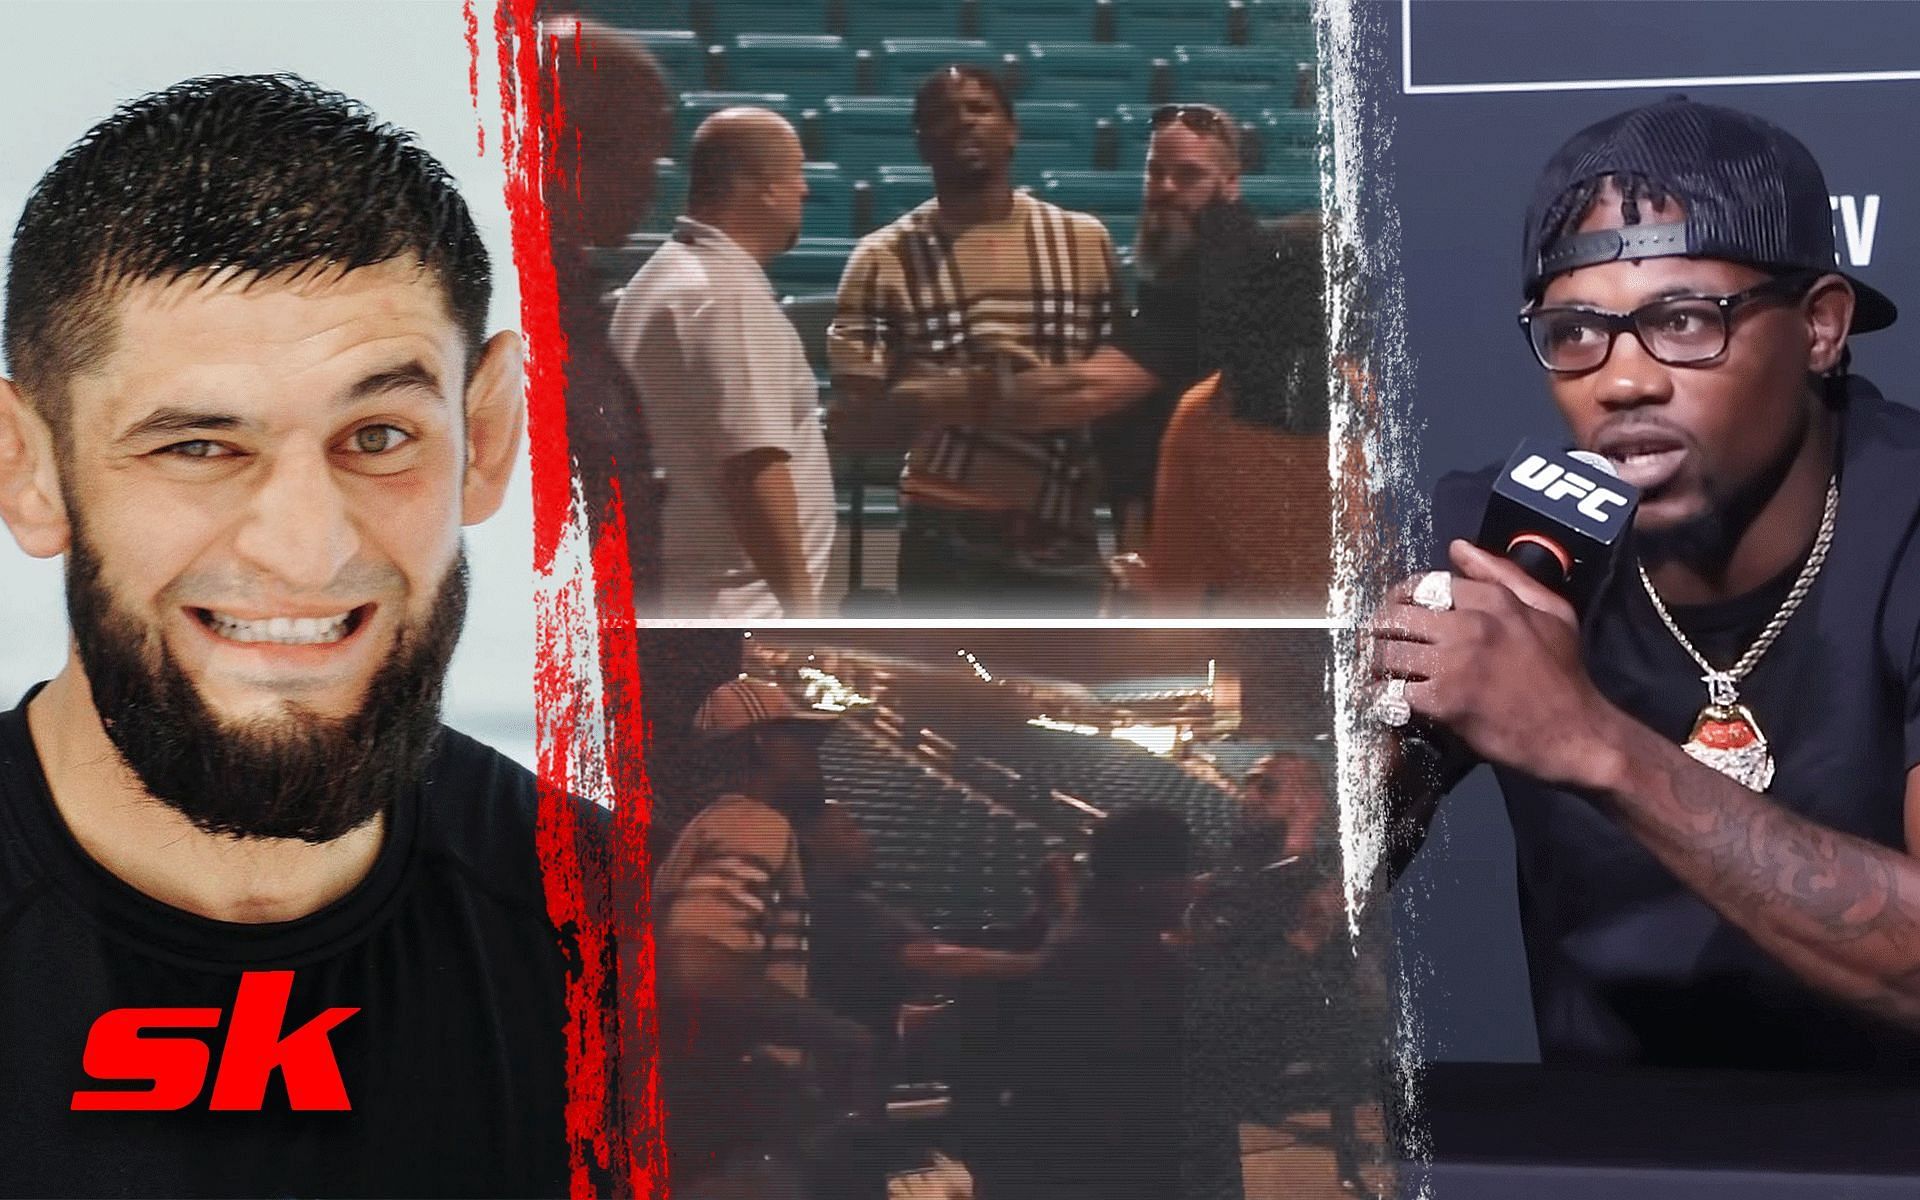 Kevin Holland gives his side of the story on UFC 279 backstage brawl with Khamzat Chimaev [Images via: Holland from TheMacLife | YouTube | Chimaev from @khamzat_chimaev on Instagram| rest from Rebel MMA | YouTube]